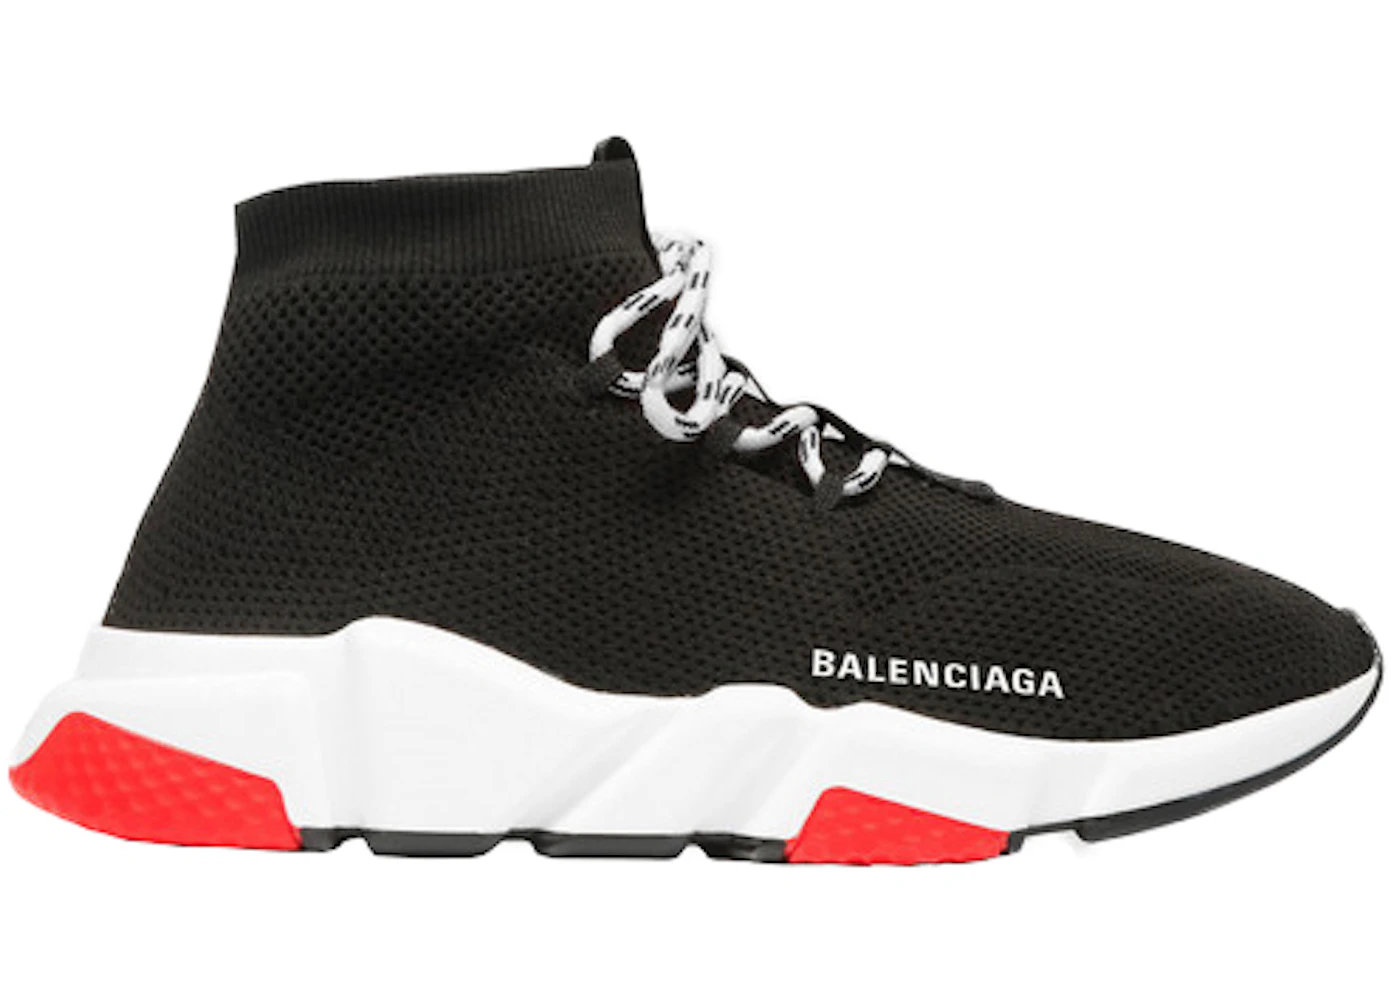 disconnected Wade Abnormal Balenciaga Speed Trainer Lace Up Black Red - 560237W1HP01000 - JP